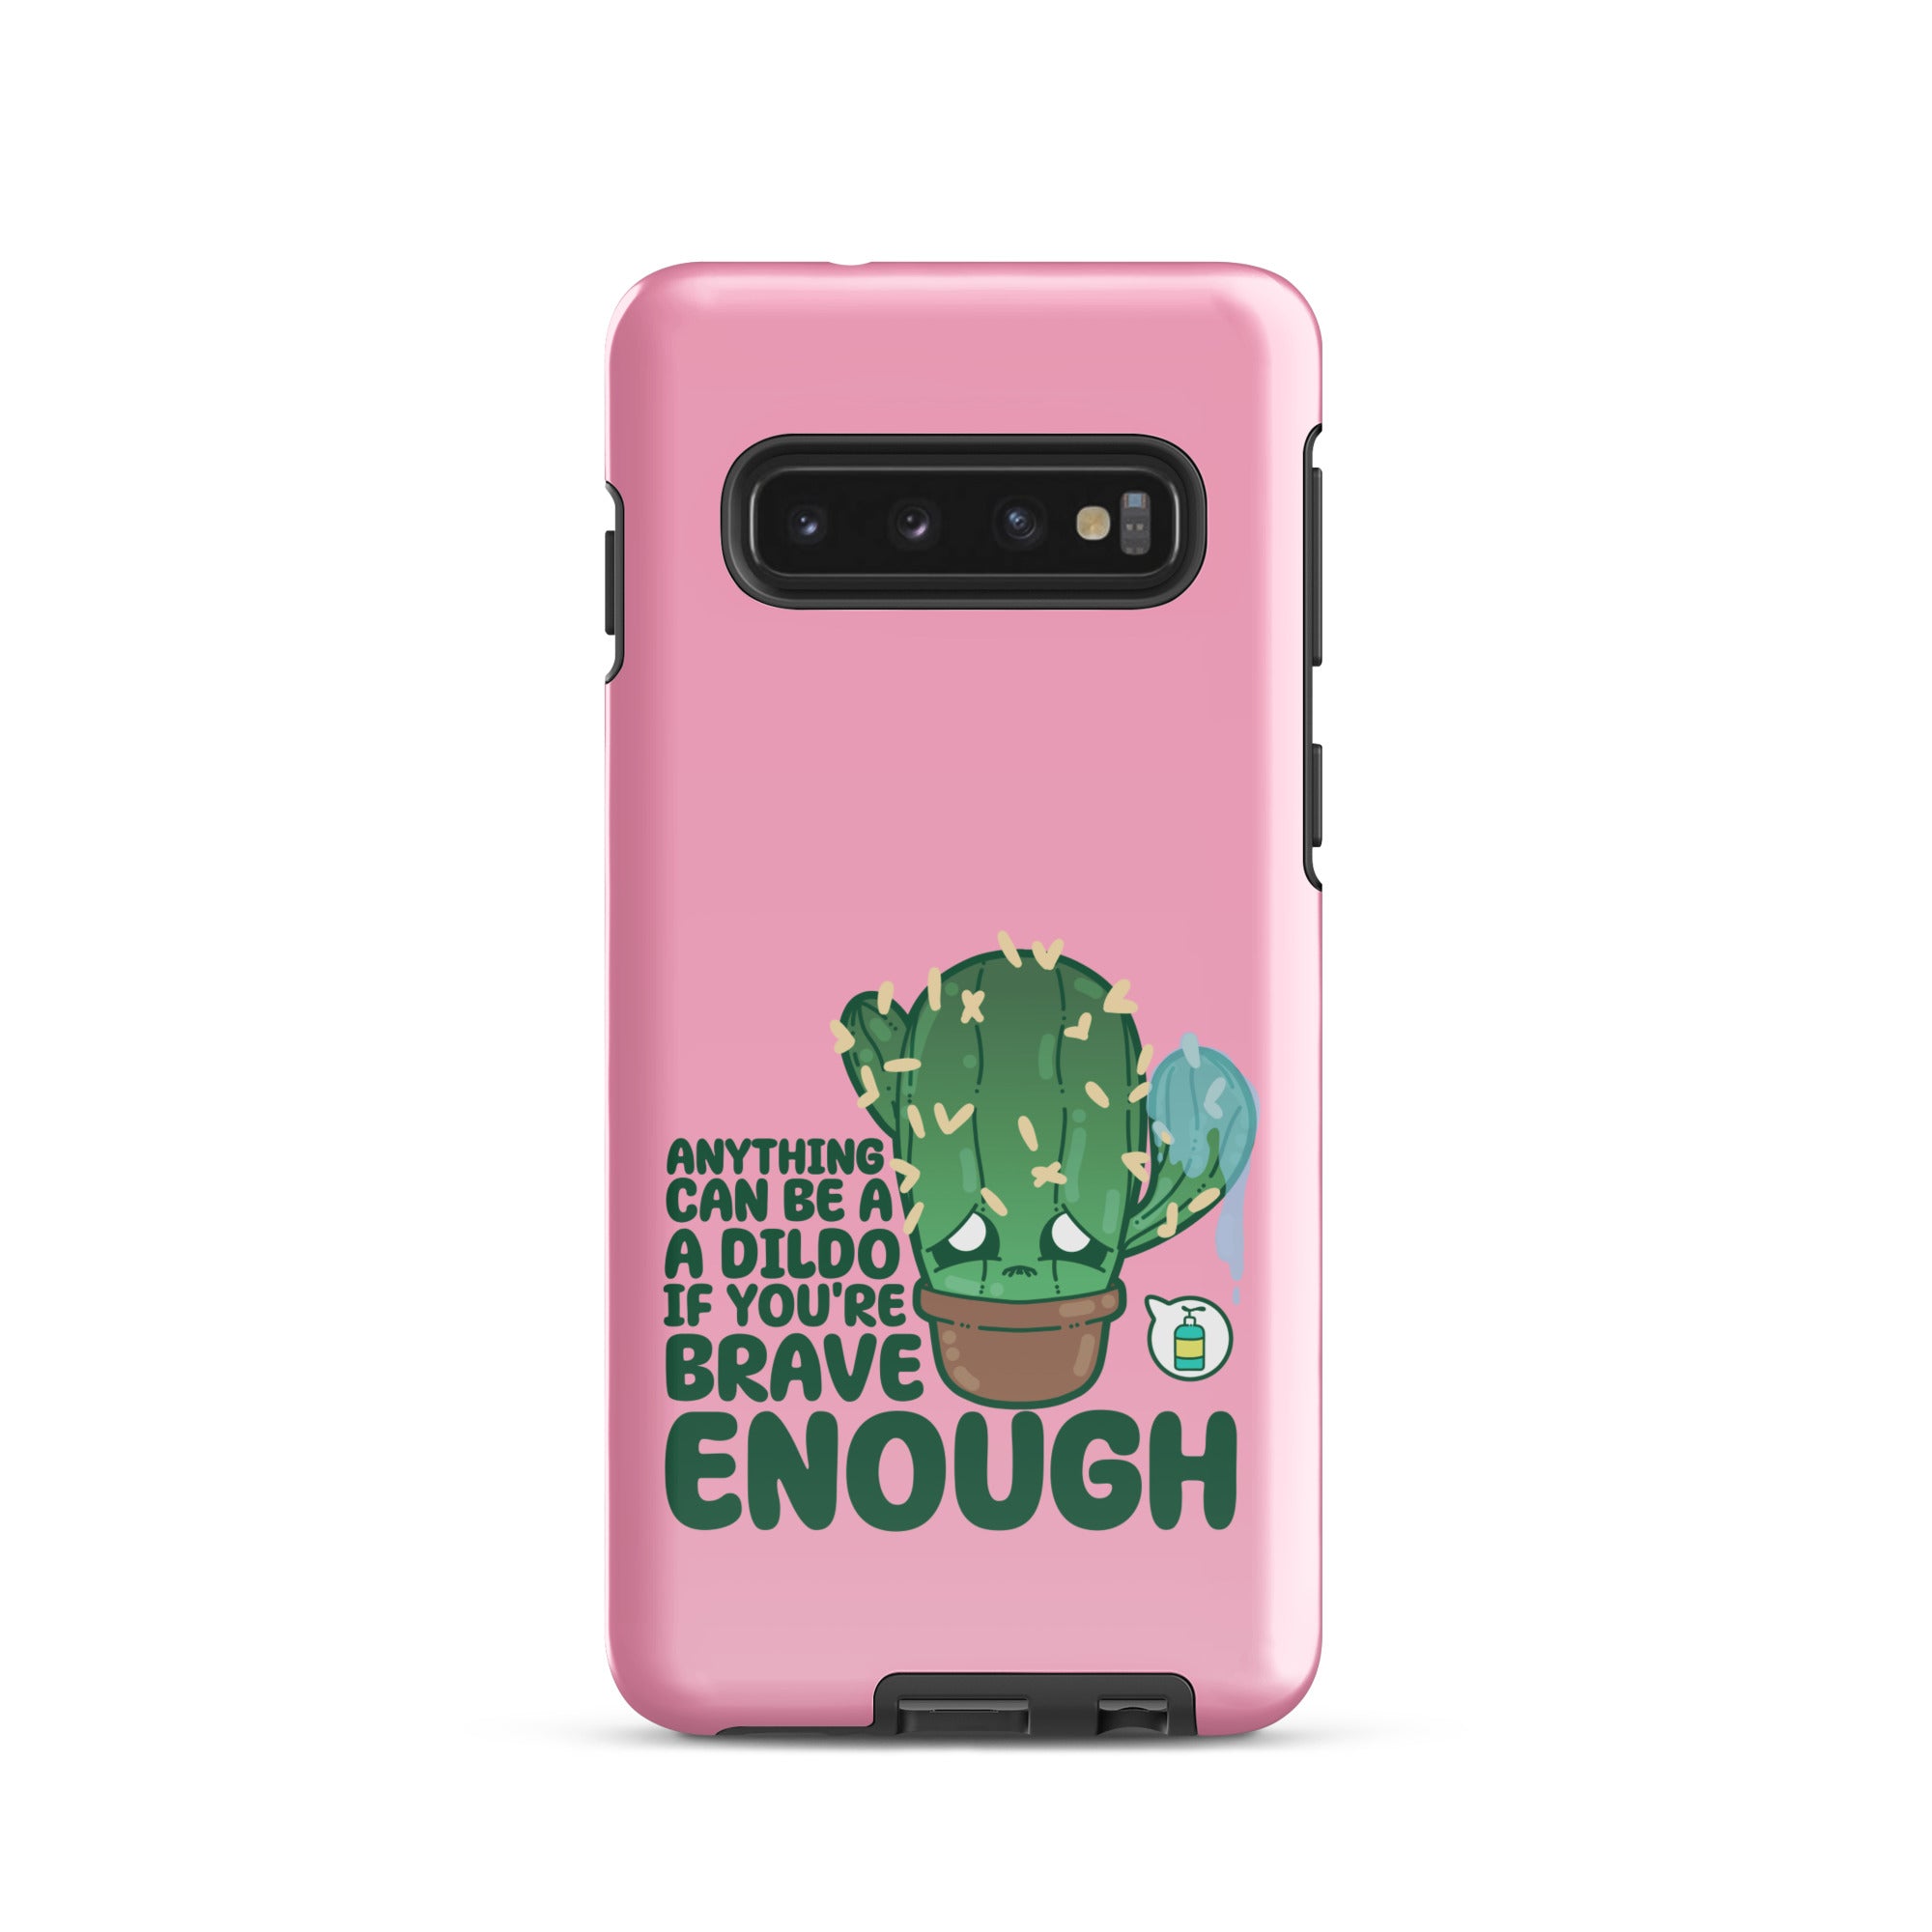 ANYTHING CAN BE A DILDO - Tough case for Samsung®